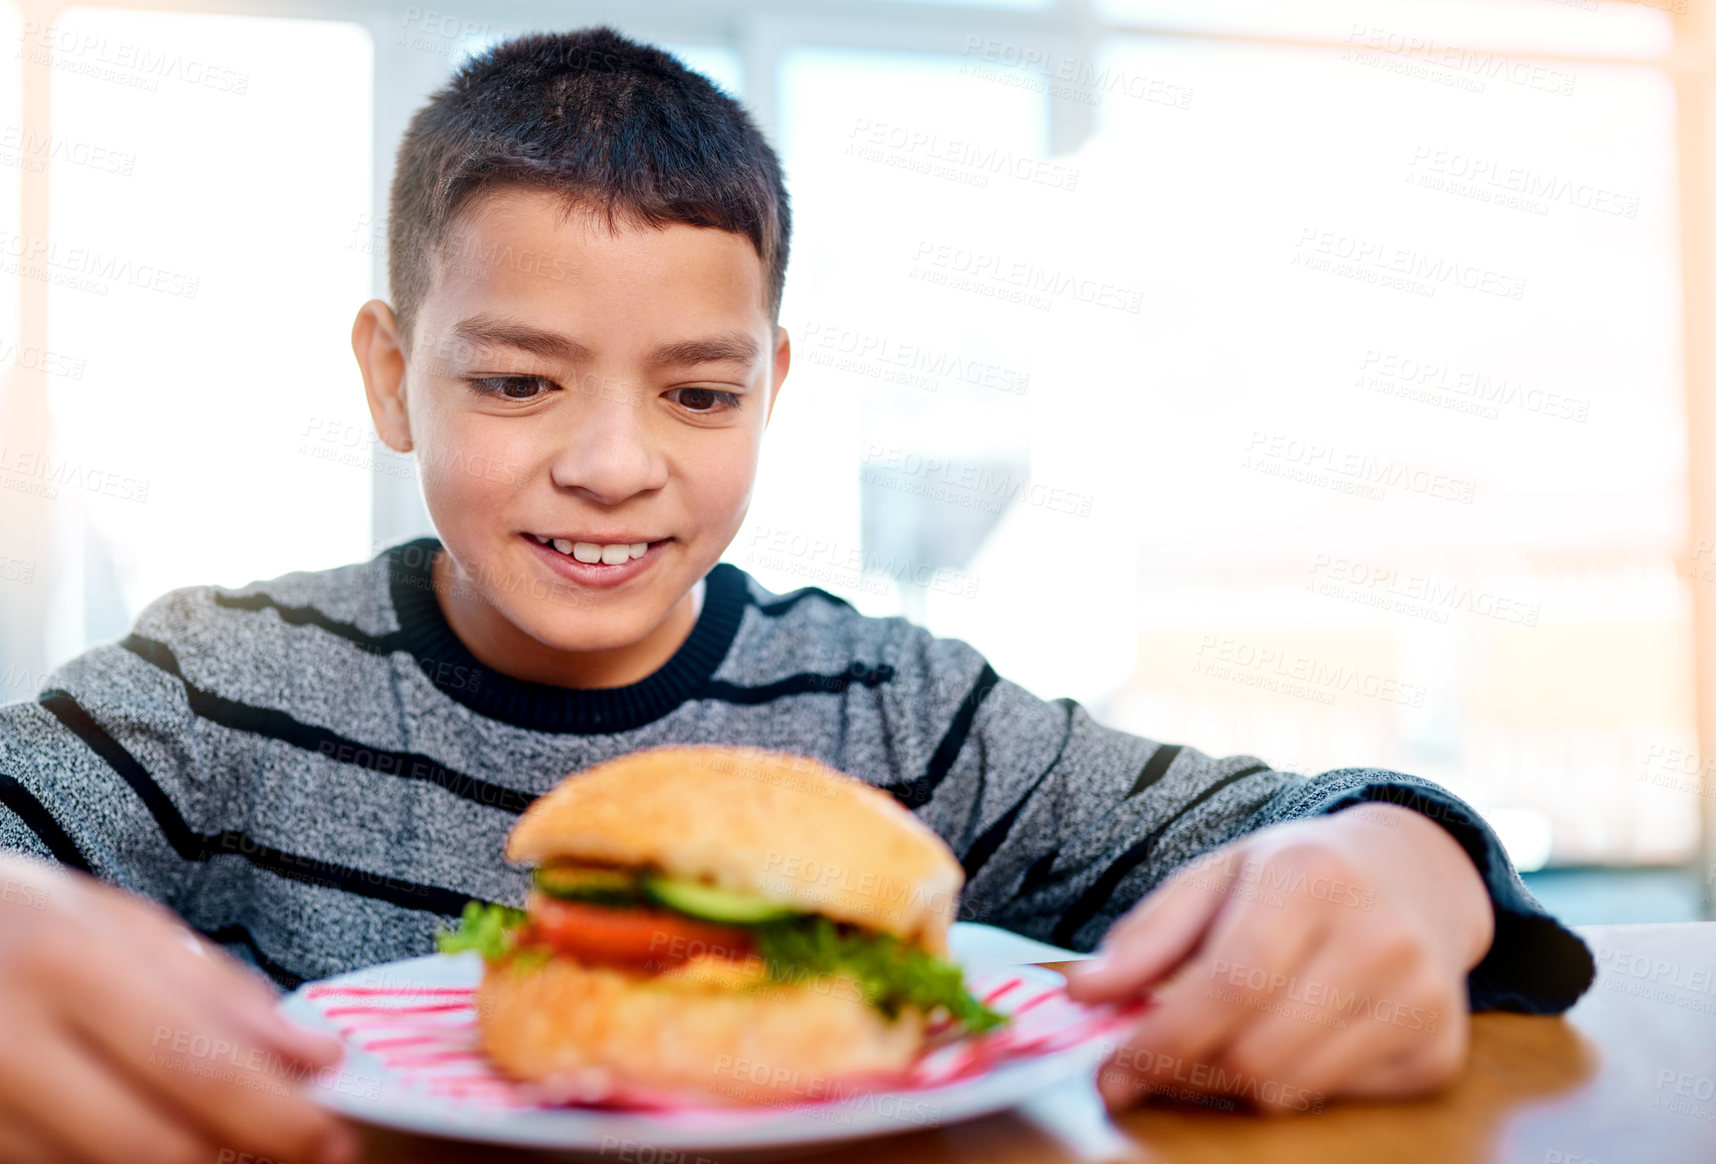 Buy stock photo Shot of a young boy looking at his delicious burger while sitting at his table at home